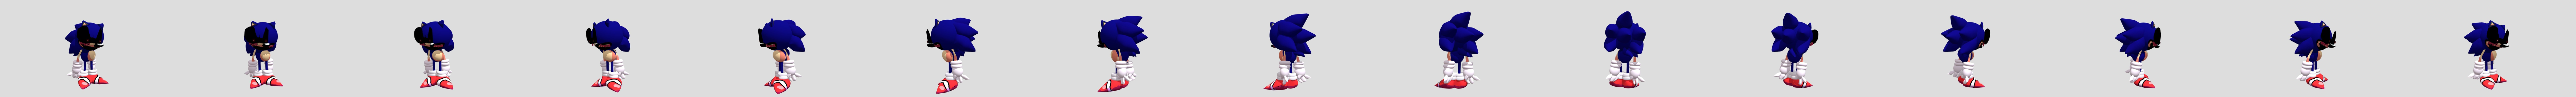 FNF Fleetway Sonic 4.0 - Download Free 3D model by Luther (@..nosarahnorb)  [575a813]